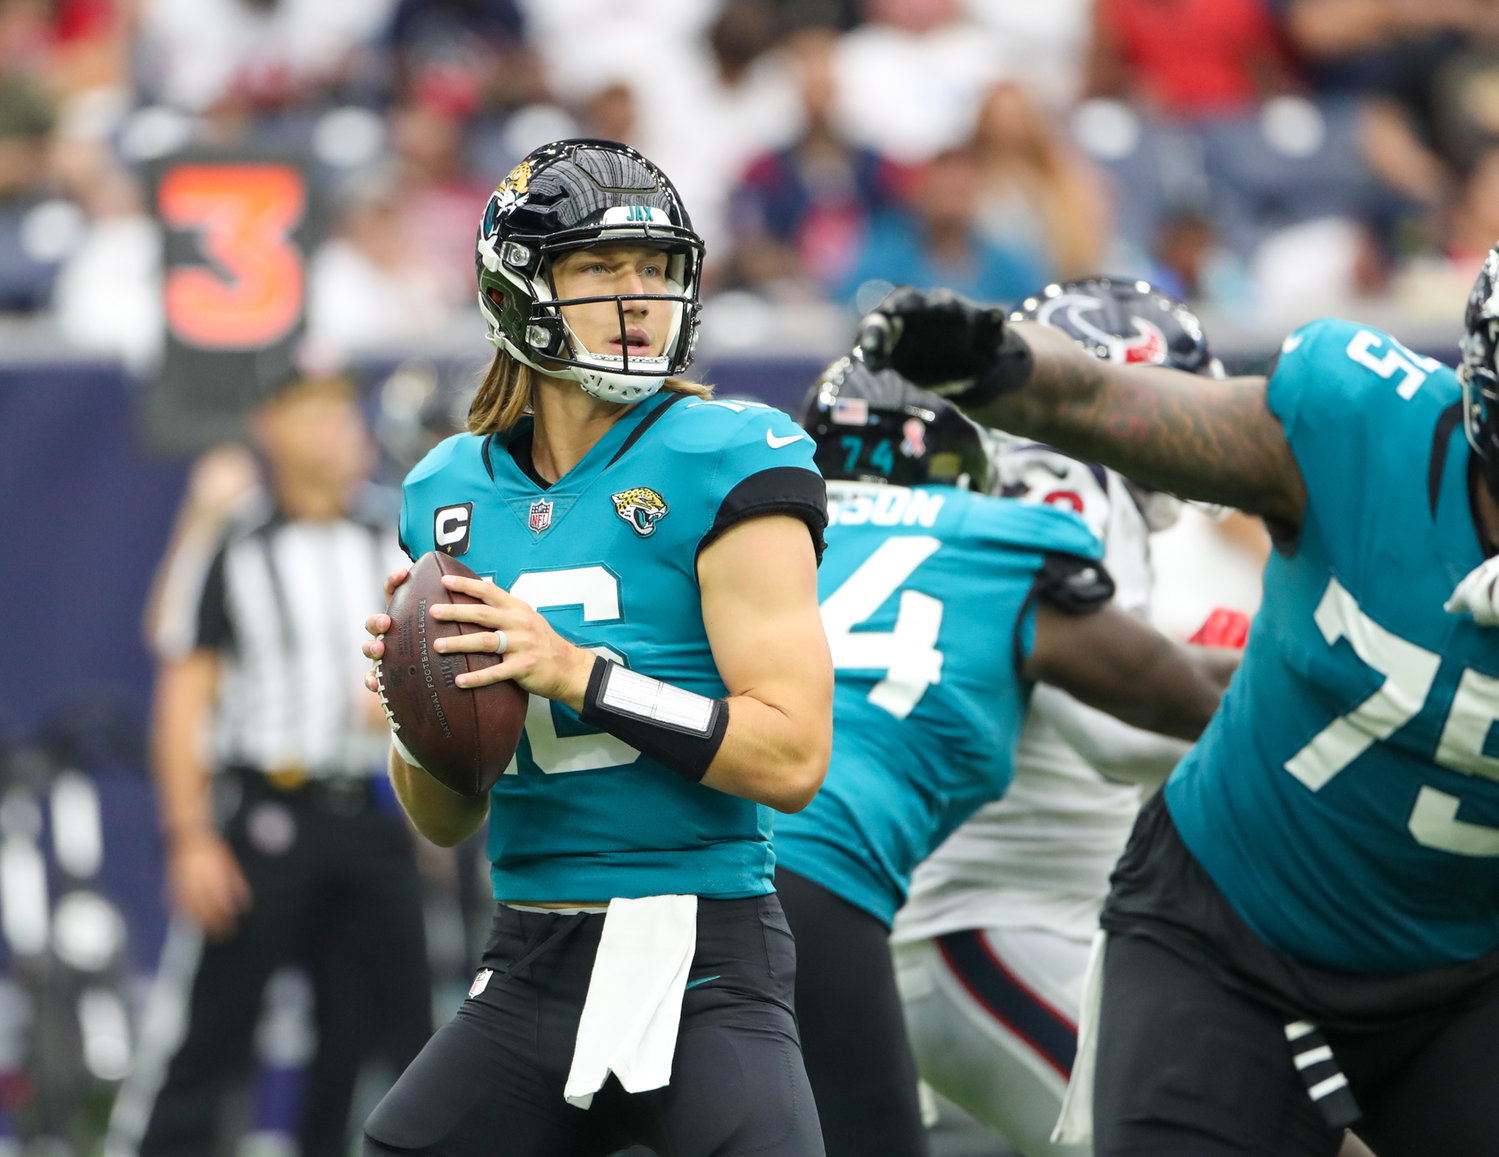 Jacksonville Jaguars quarterback Trevor Lawrence (16) looks to pass during the second half of an NFL game between the Houston Texans and the Jacksonville Jaguars on September 12, 2021 in Houston, Texas.